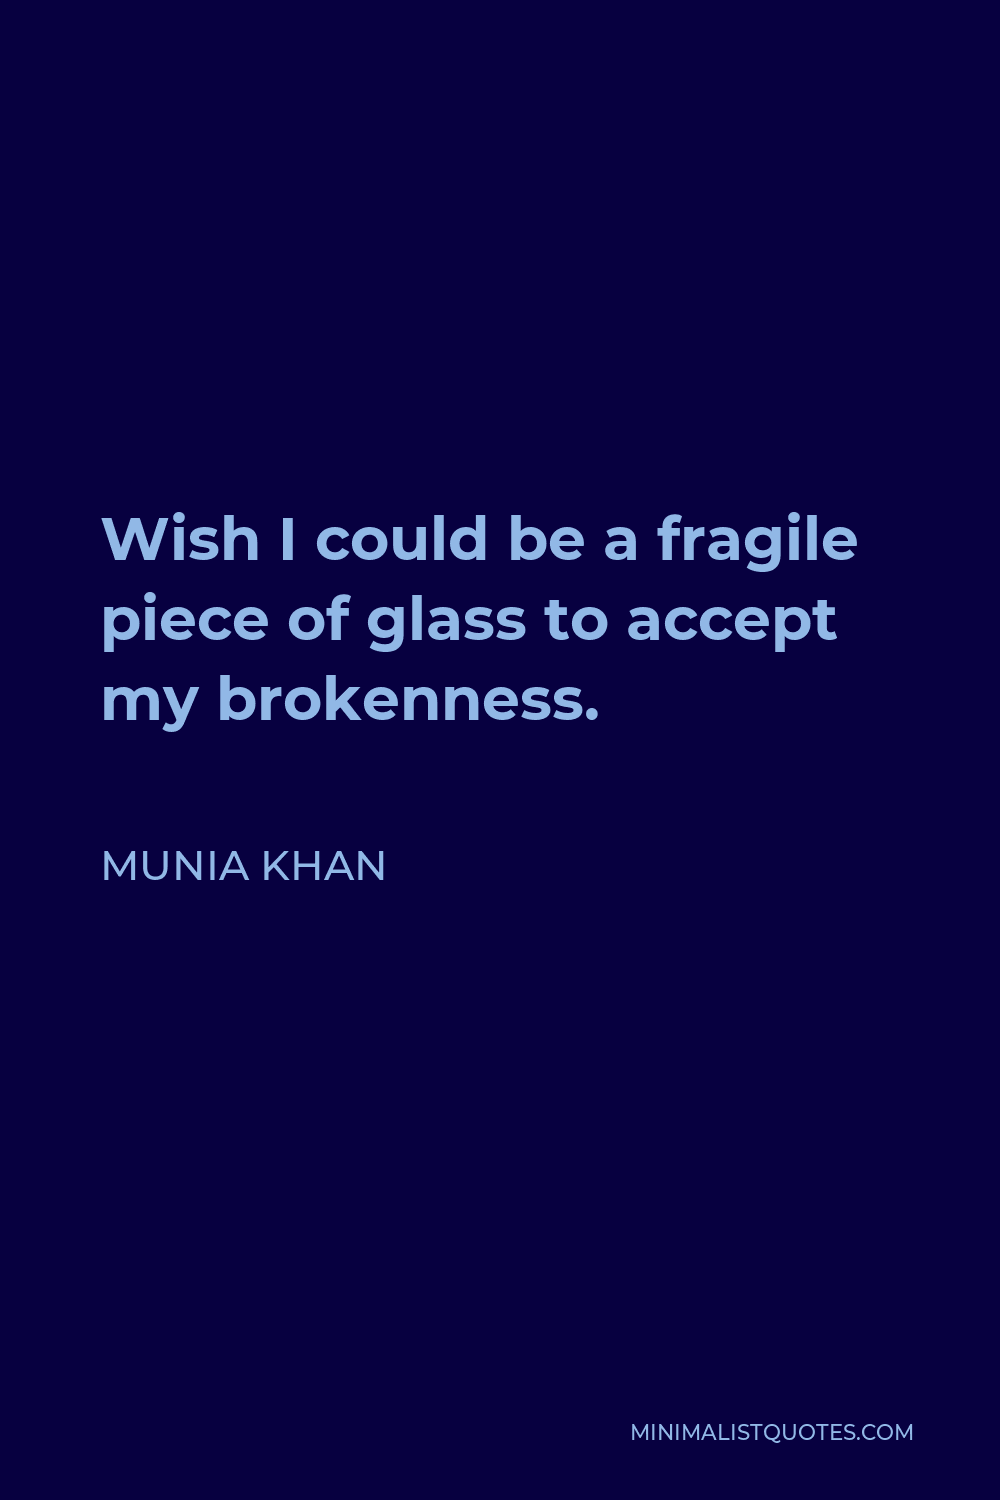 Munia Khan Quote - Wish I could be a fragile piece of glass to accept my brokenness.